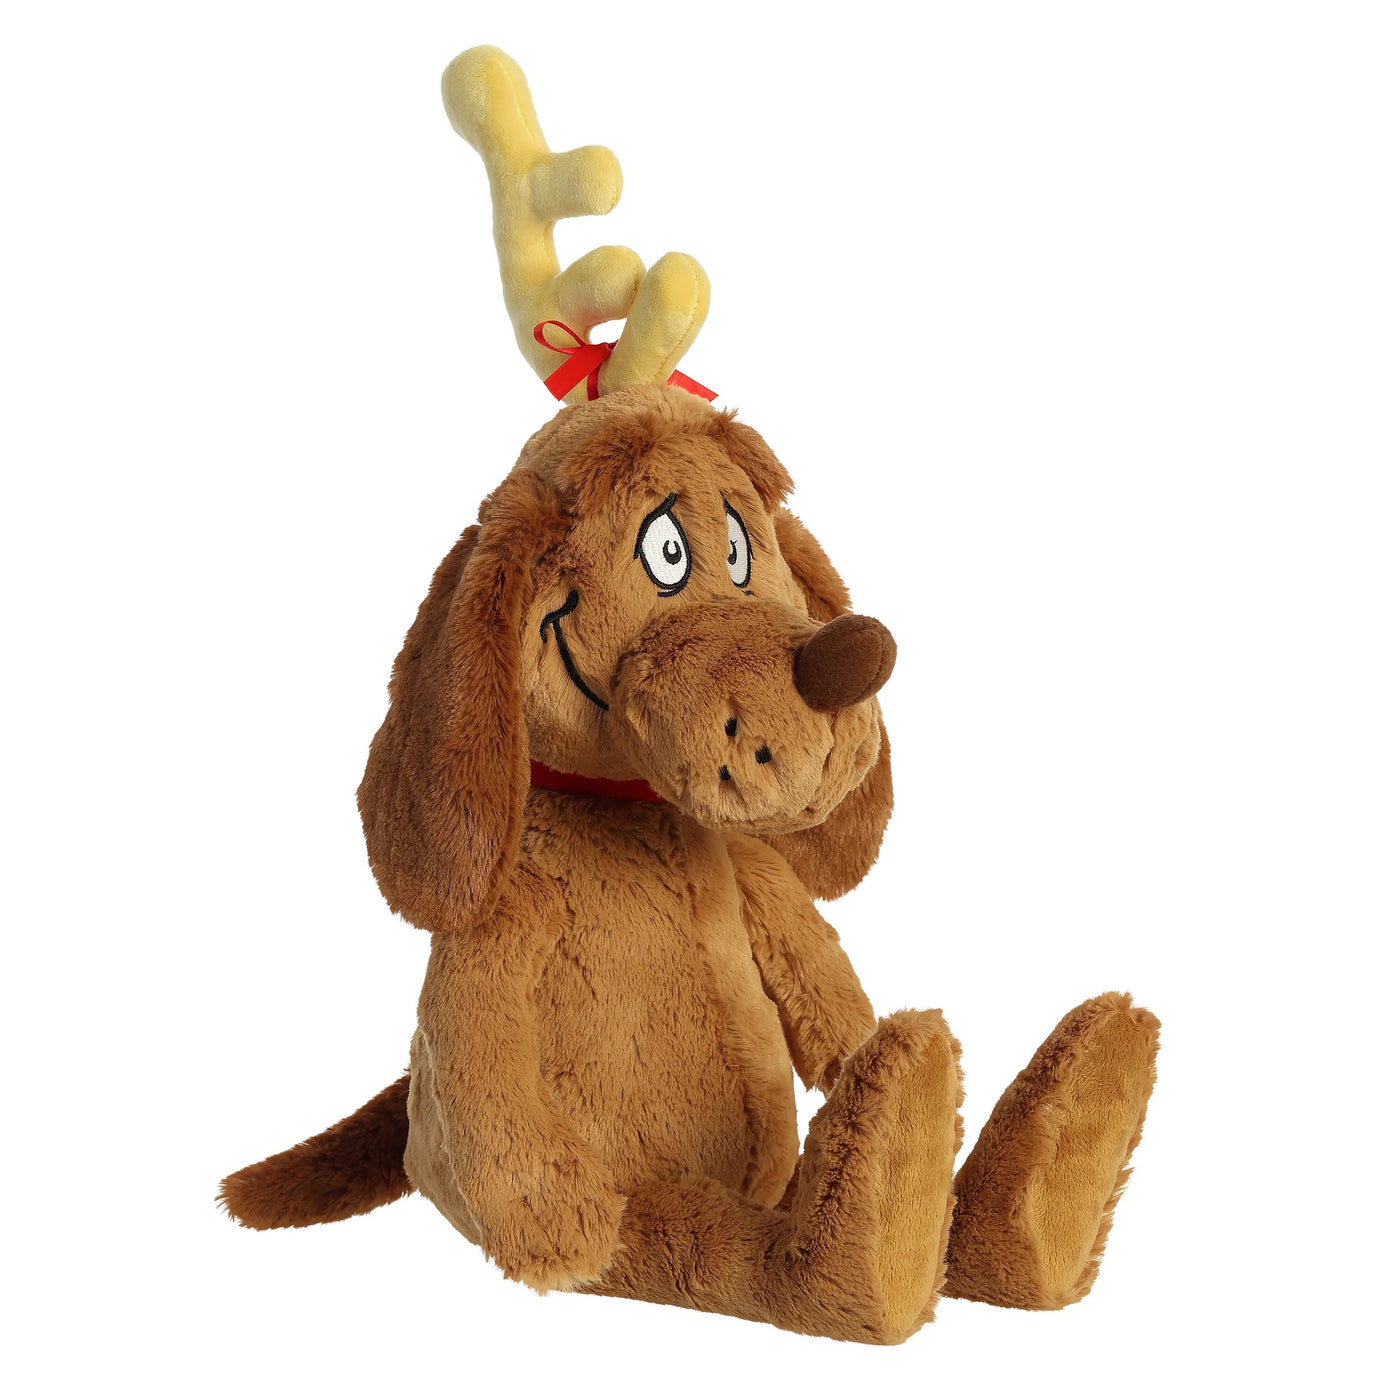 Aurora Dr. Seuss. The Grinch 20" Max the Dog Plush Toy - Side View